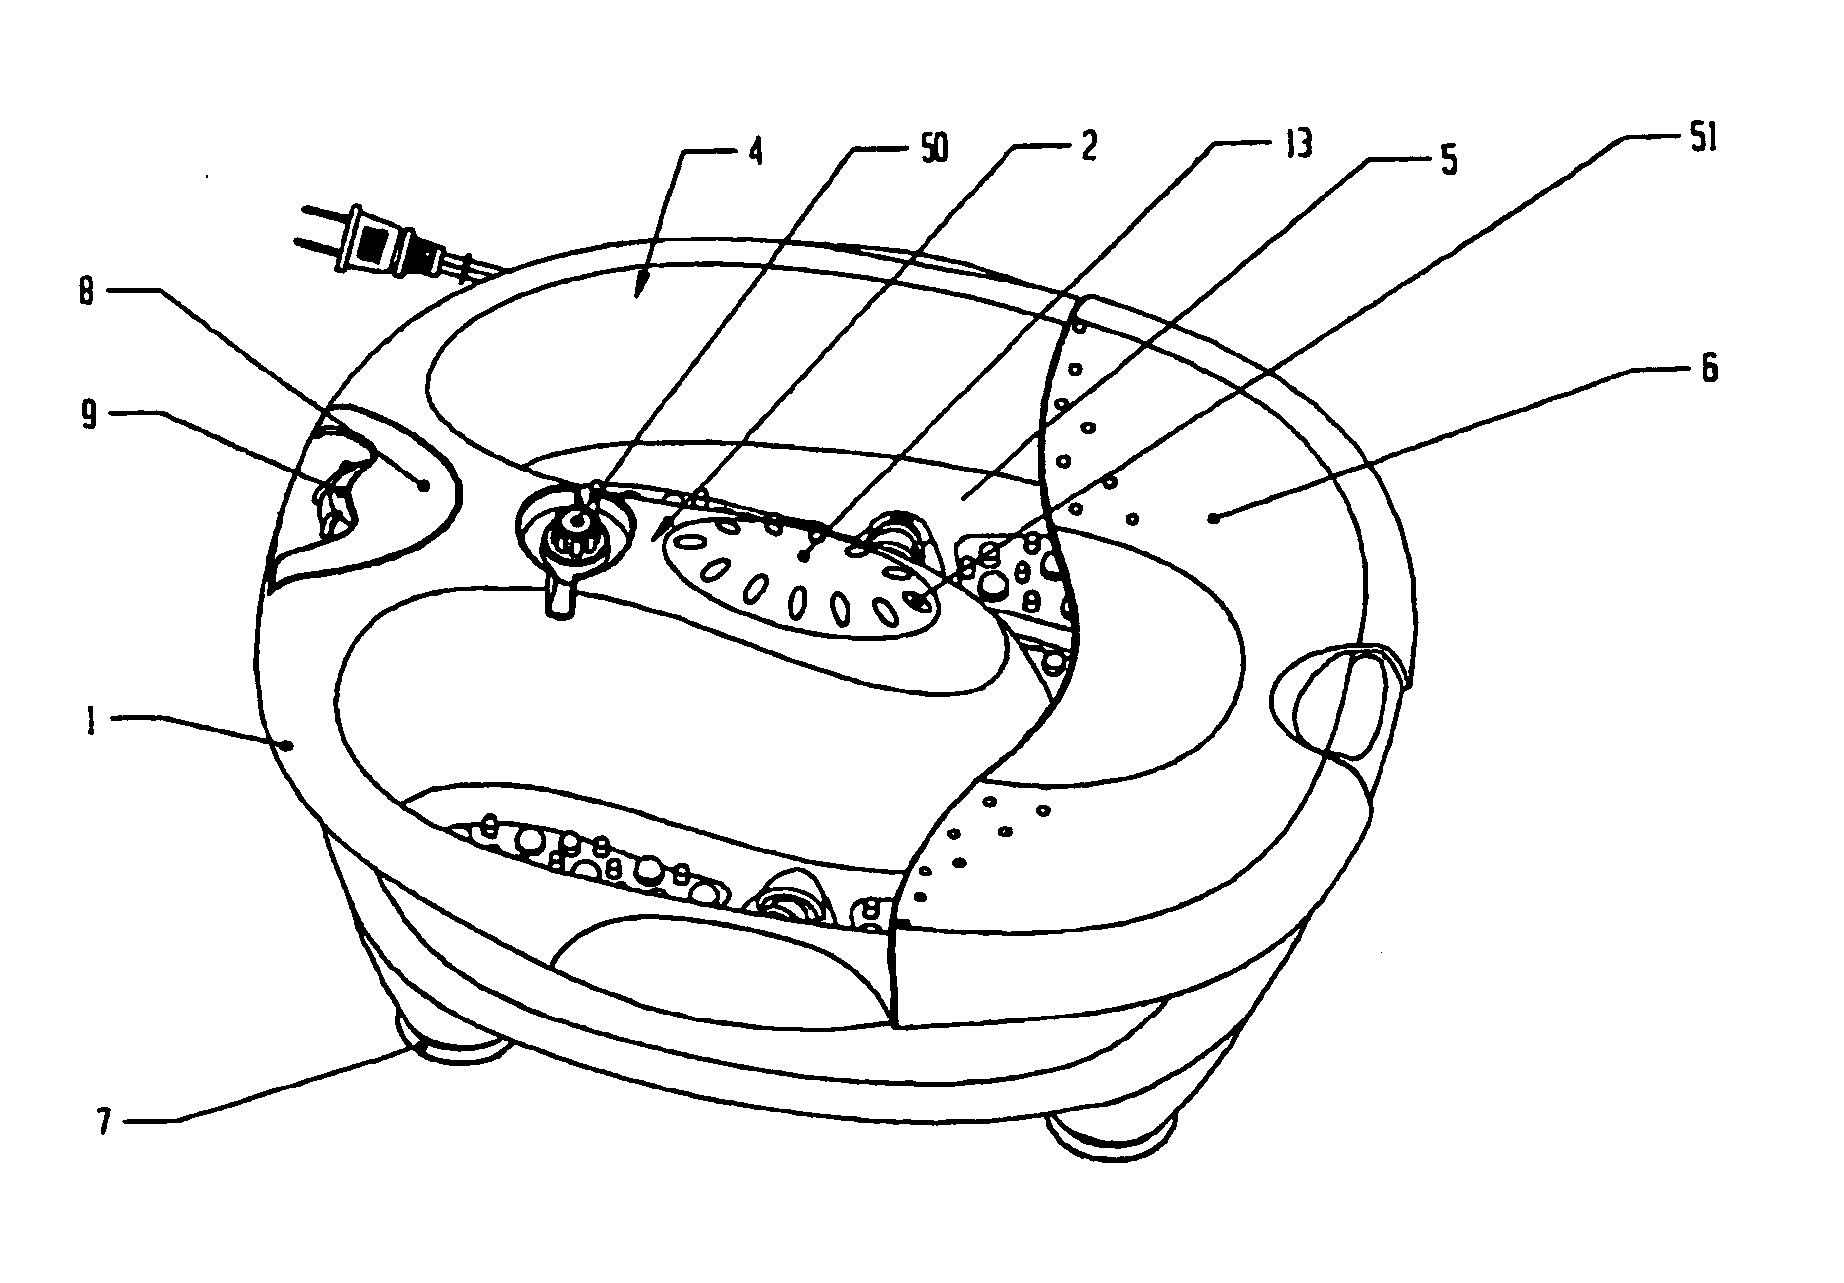 Motorized foot caring and massage device